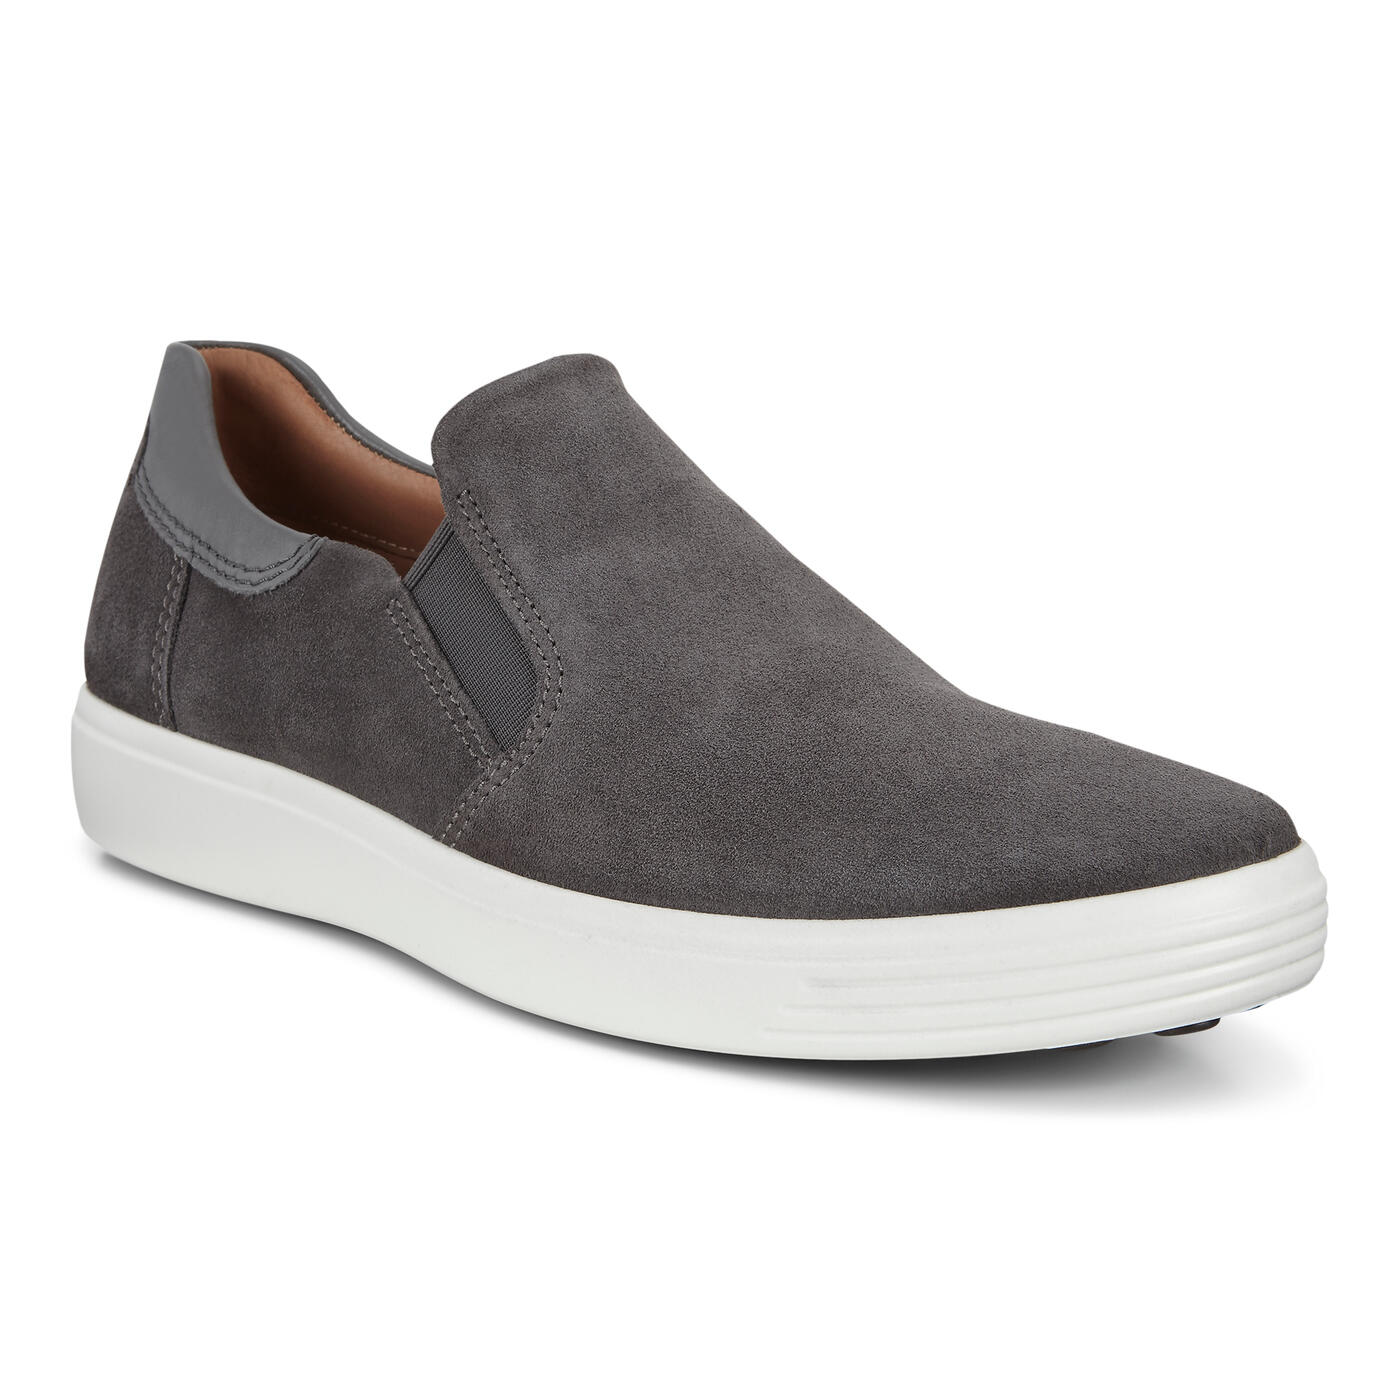 Men's Soft 7 Soft Slip-ons | Order today | ECCO® Shoes